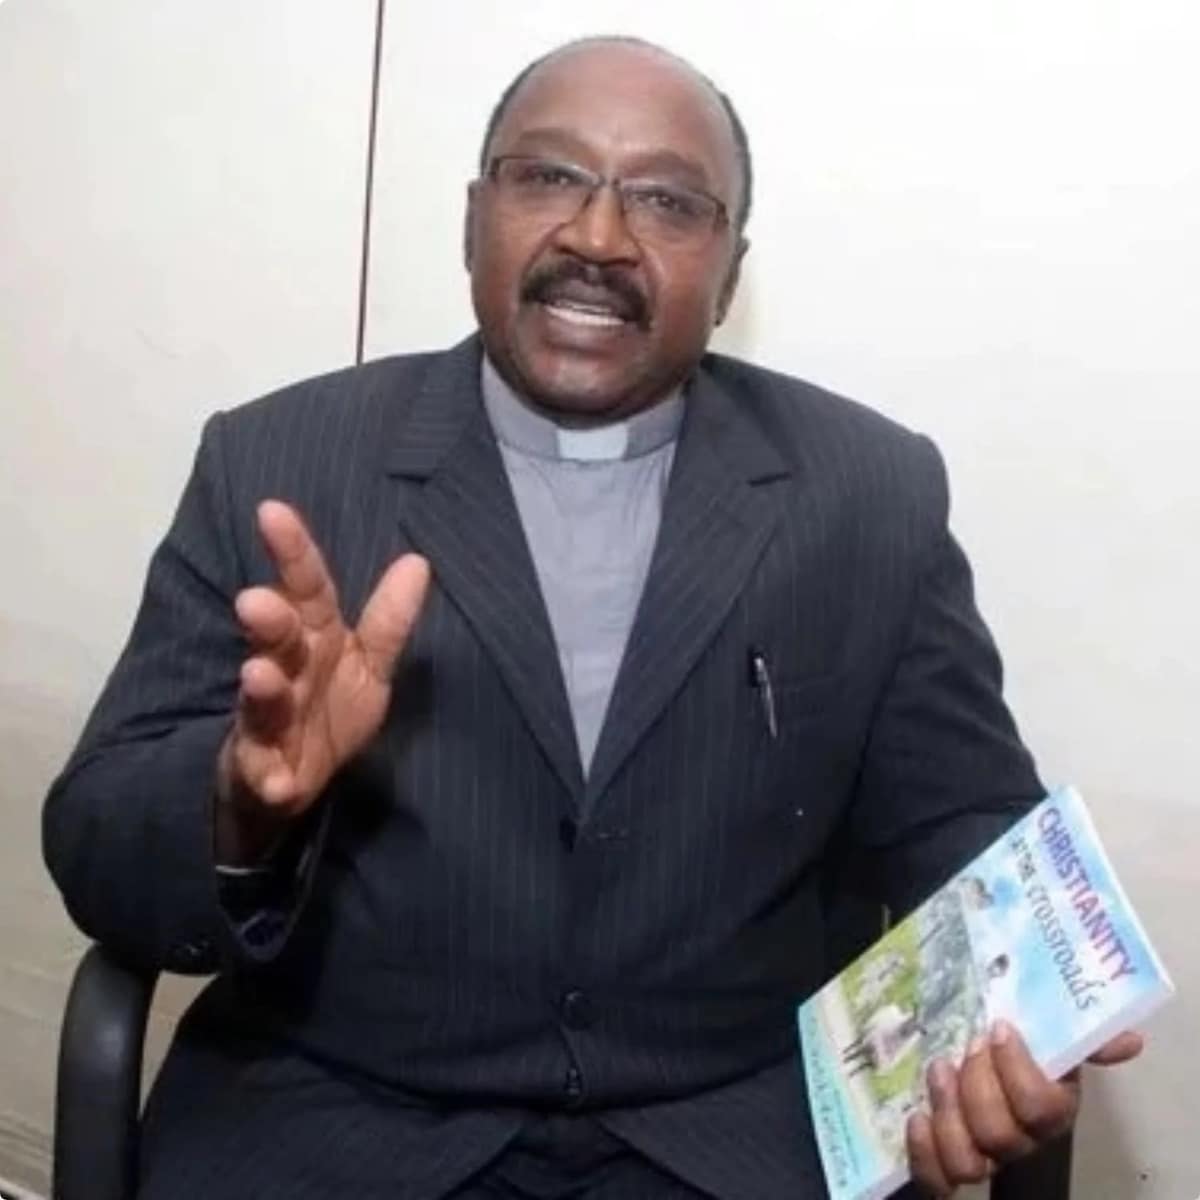 Marry more wives; the Bible supports polygamy – renowned pastor ‘urges’ men